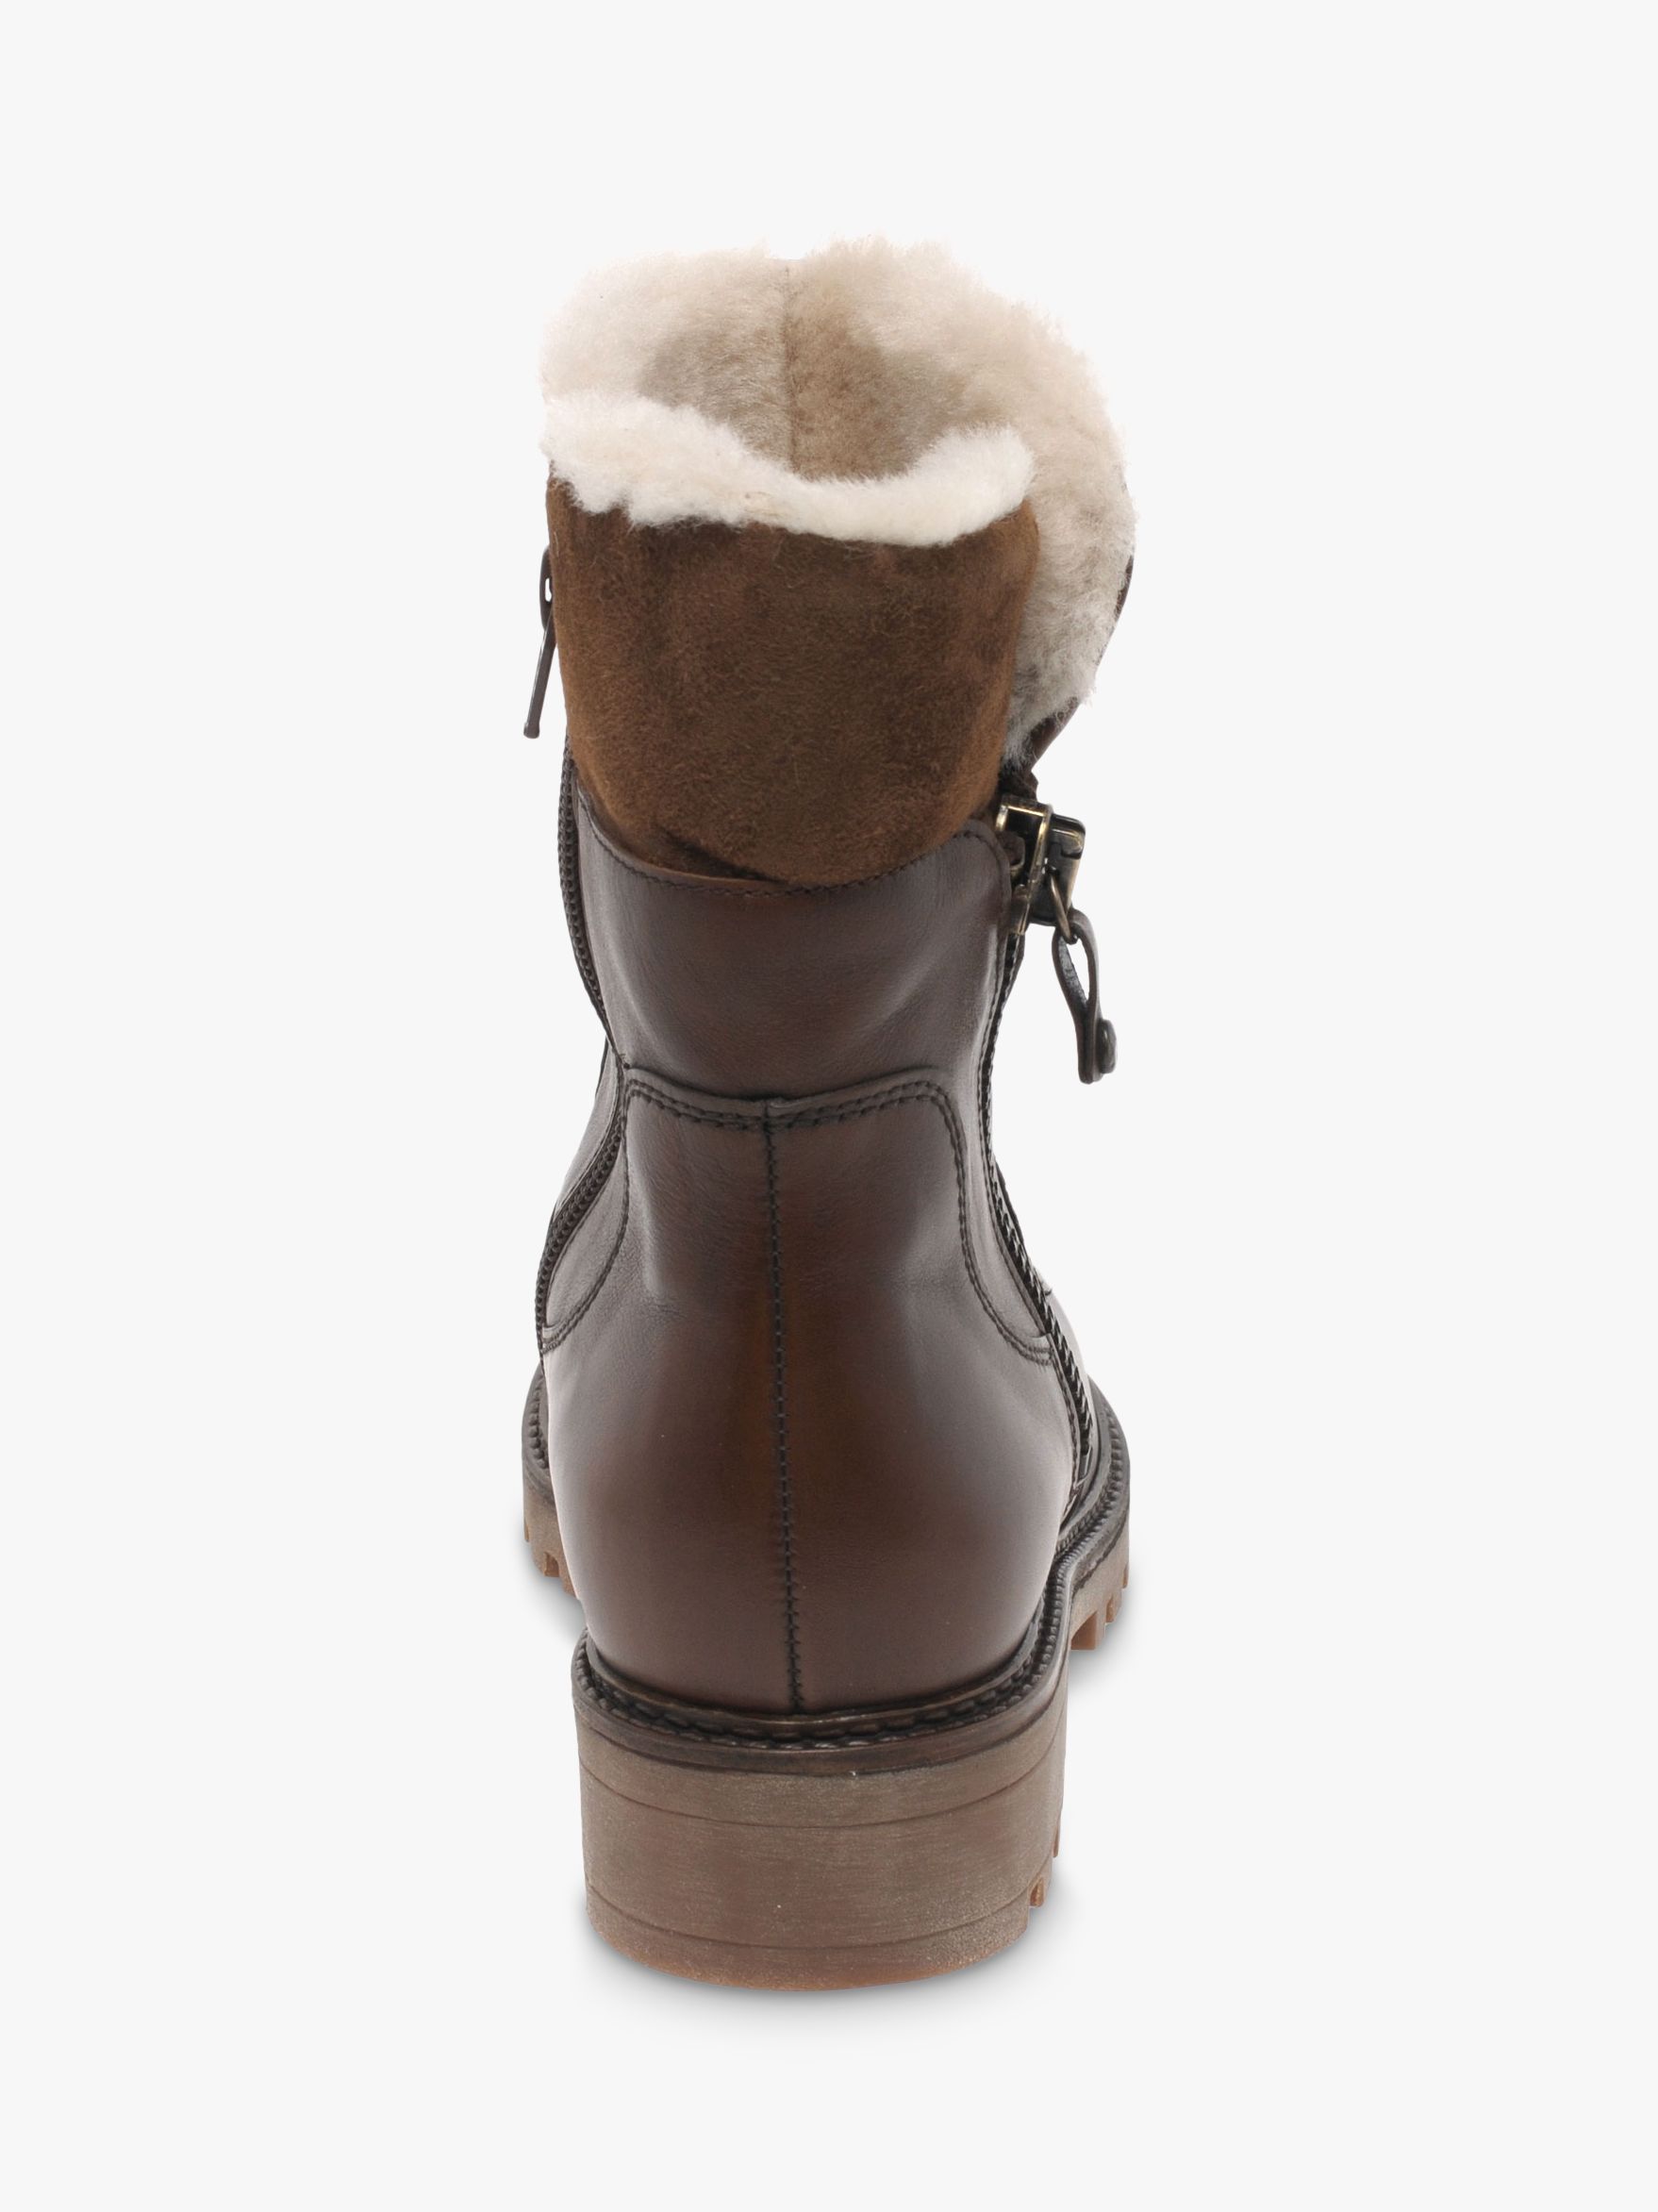 gabor fur lined boots where to buy 